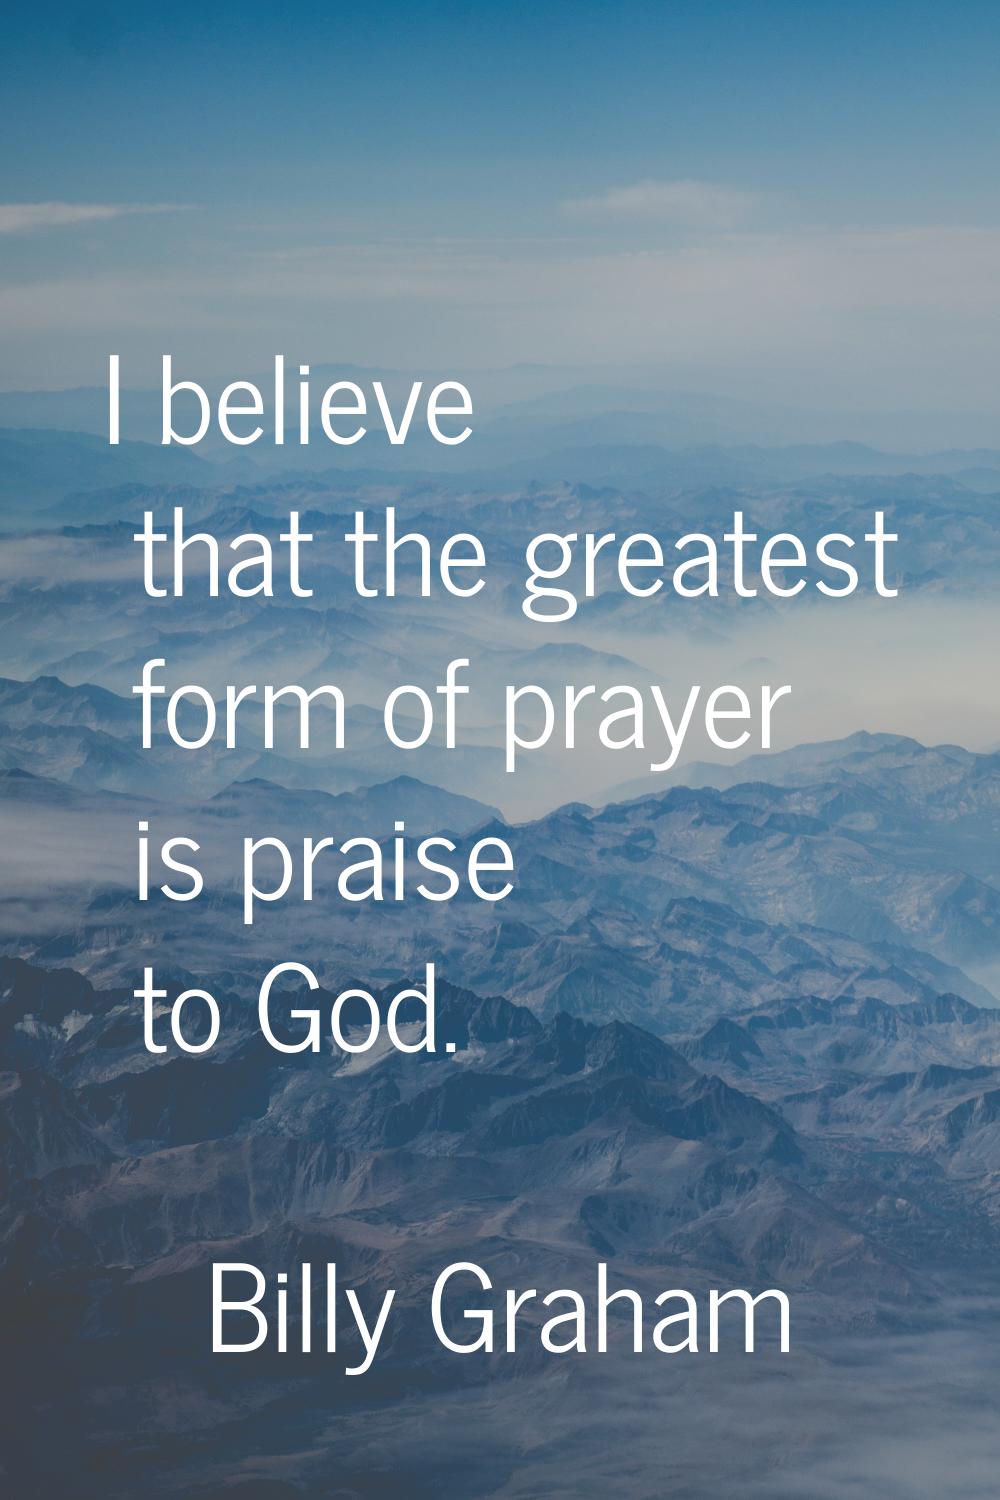 I believe that the greatest form of prayer is praise to God.